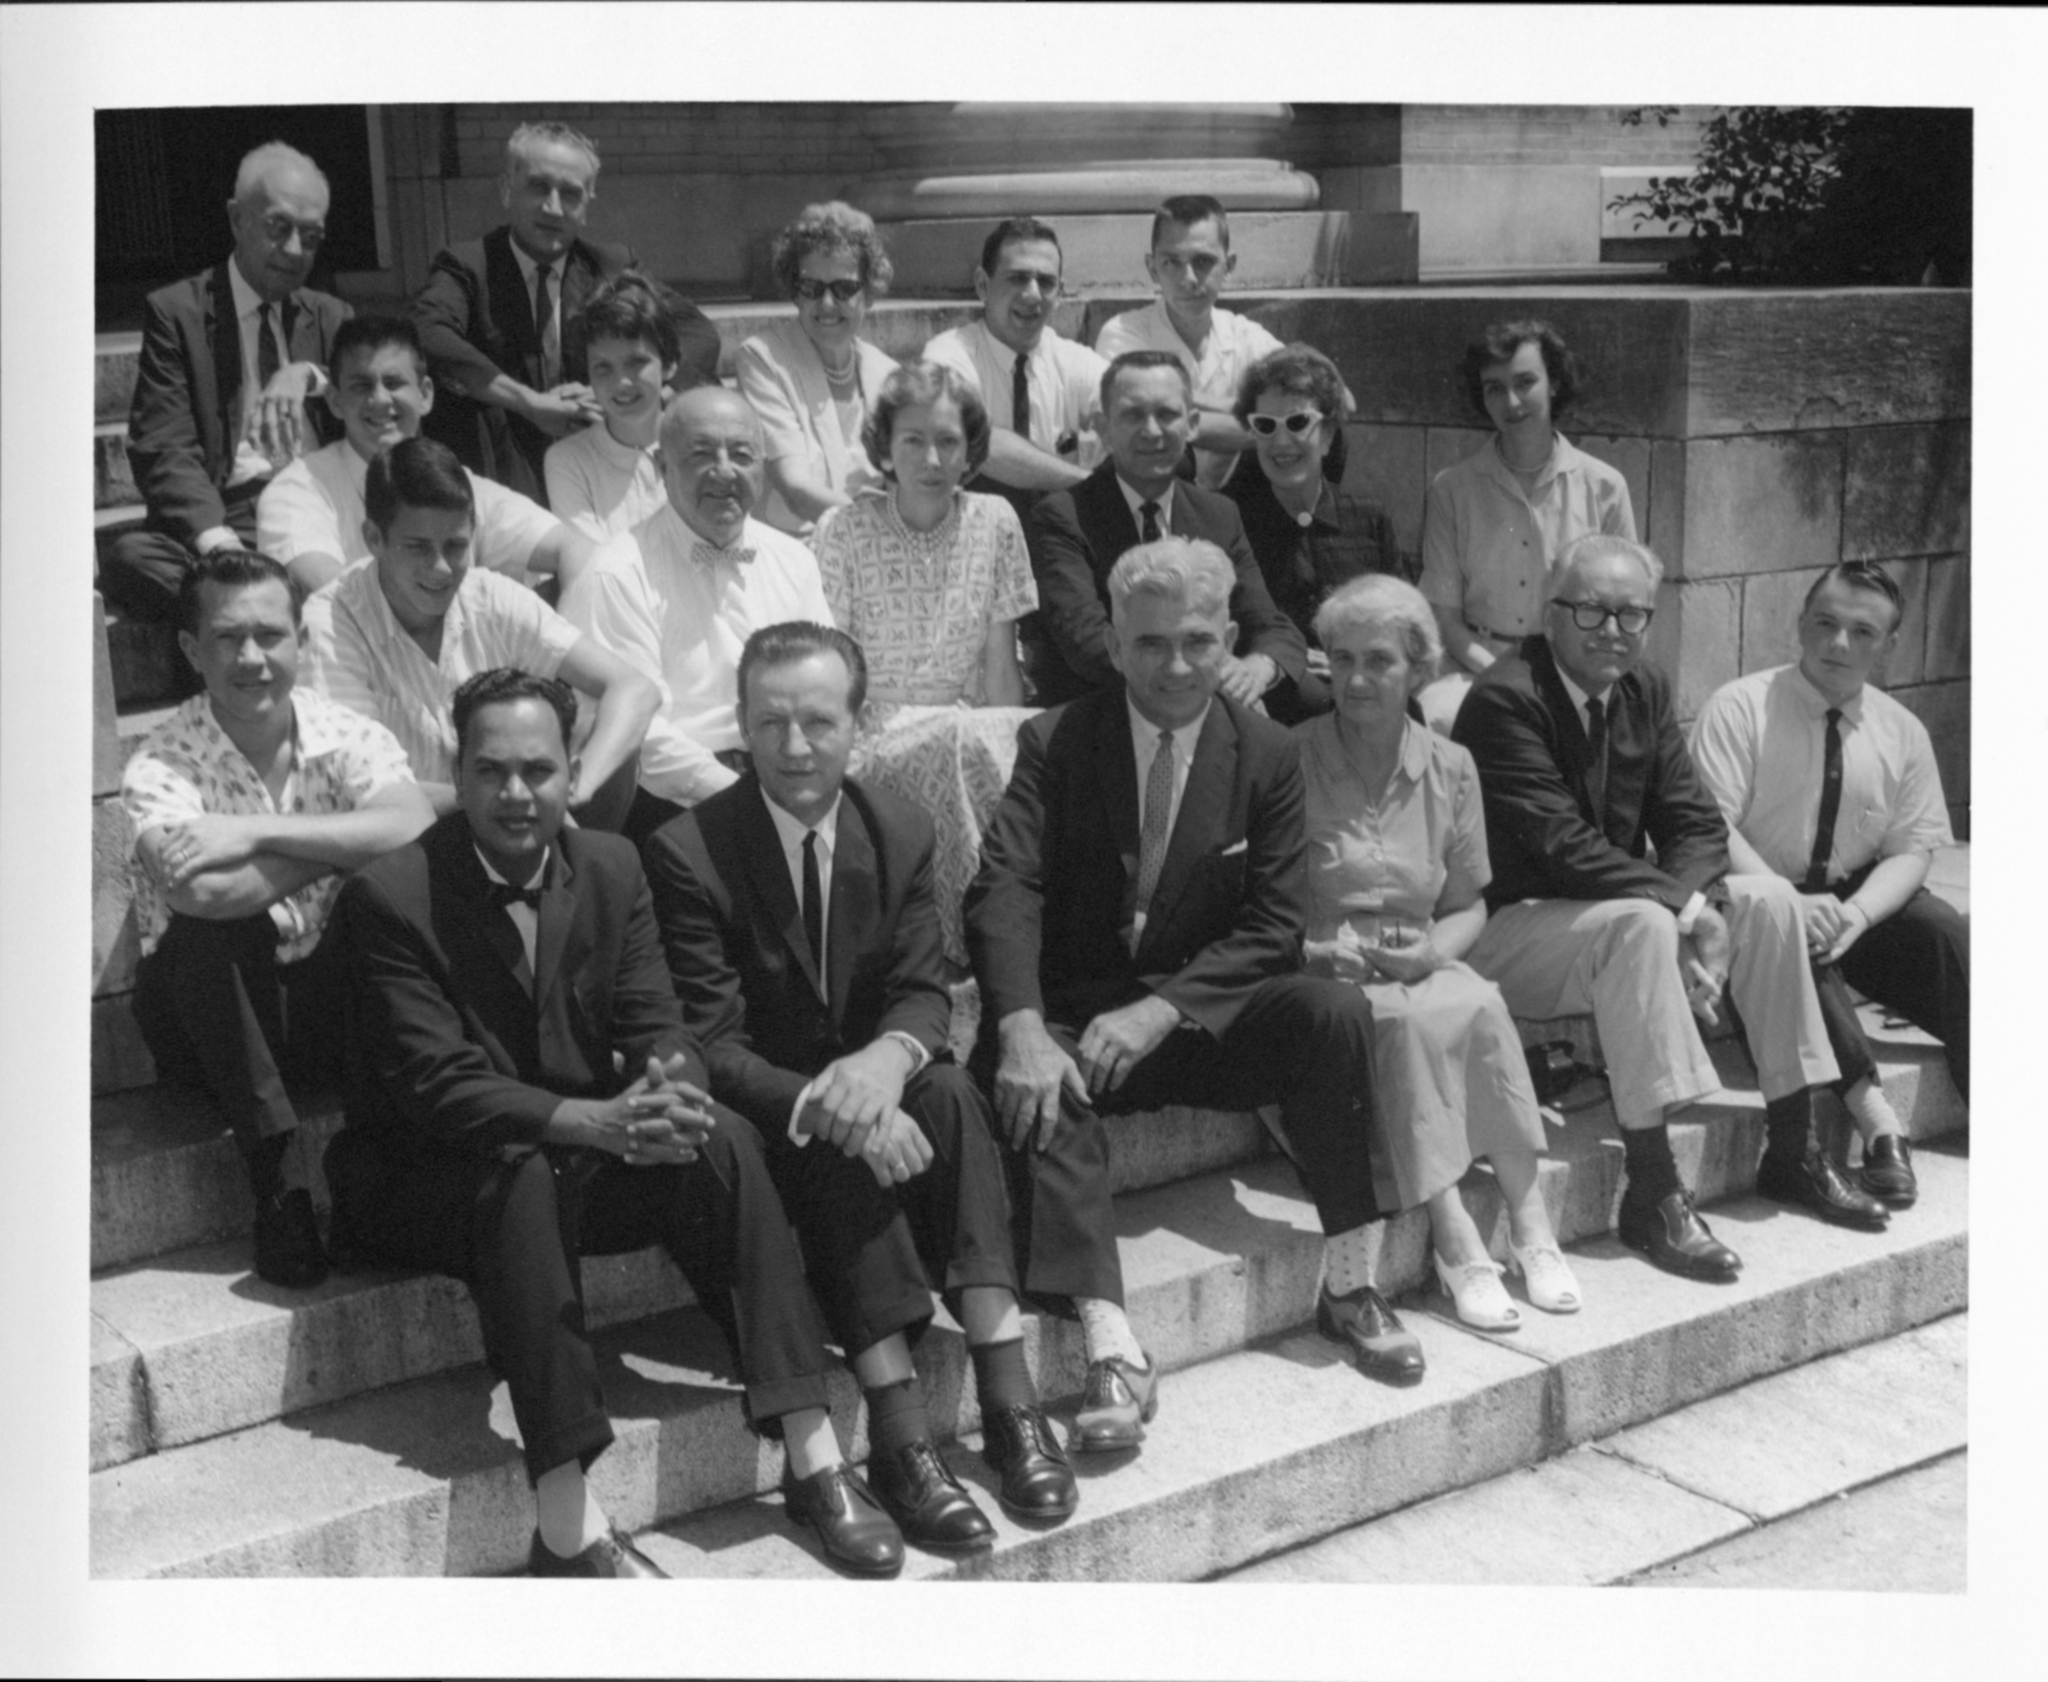 People from the Parapsychology Lab sitting on steps